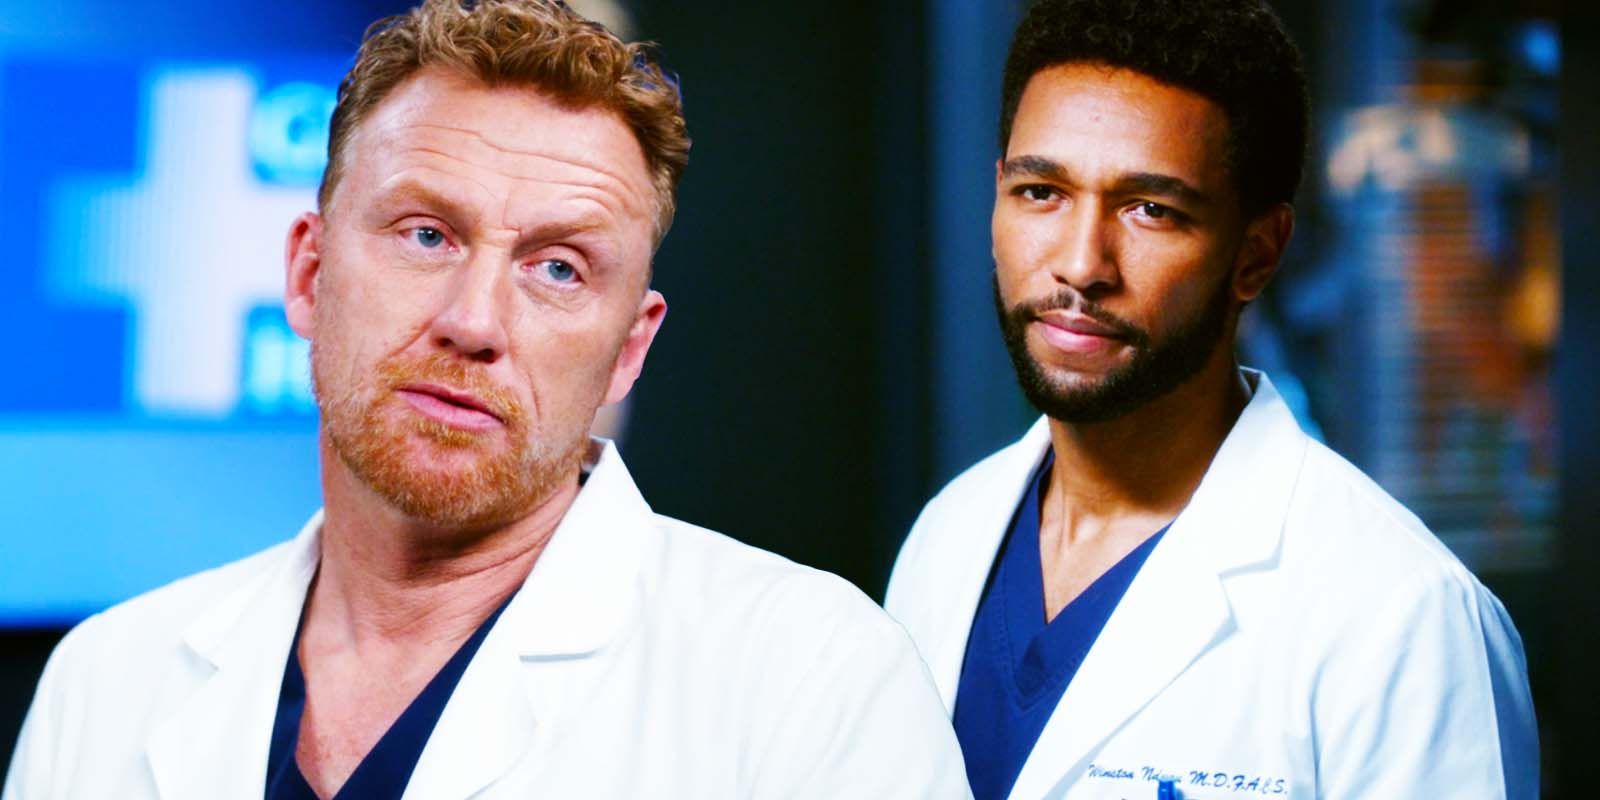 Kevin McKidd as Dr. Owen Hunt and Anthony Hill as Dr. Winston Ndugu in Grey's Anatomy season 19 episode 4